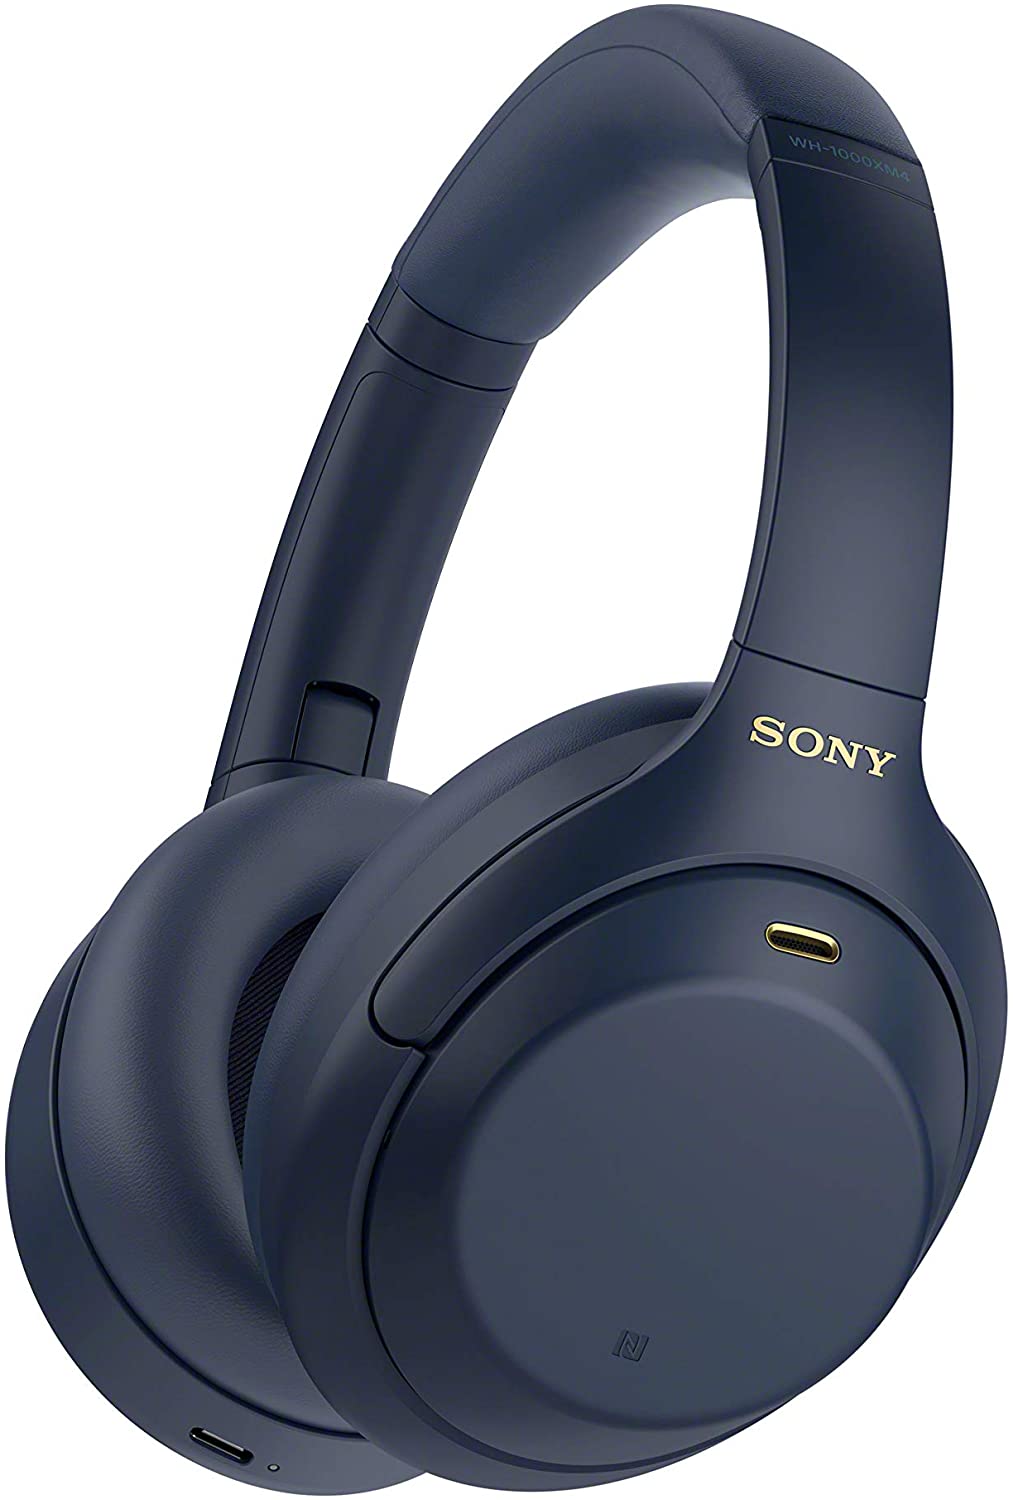 Sony WH-1000XM4 Wireless Industry Leading Noise Canceling Overhead Headphones with Mic for Phone-Call and Alexa Voice Control